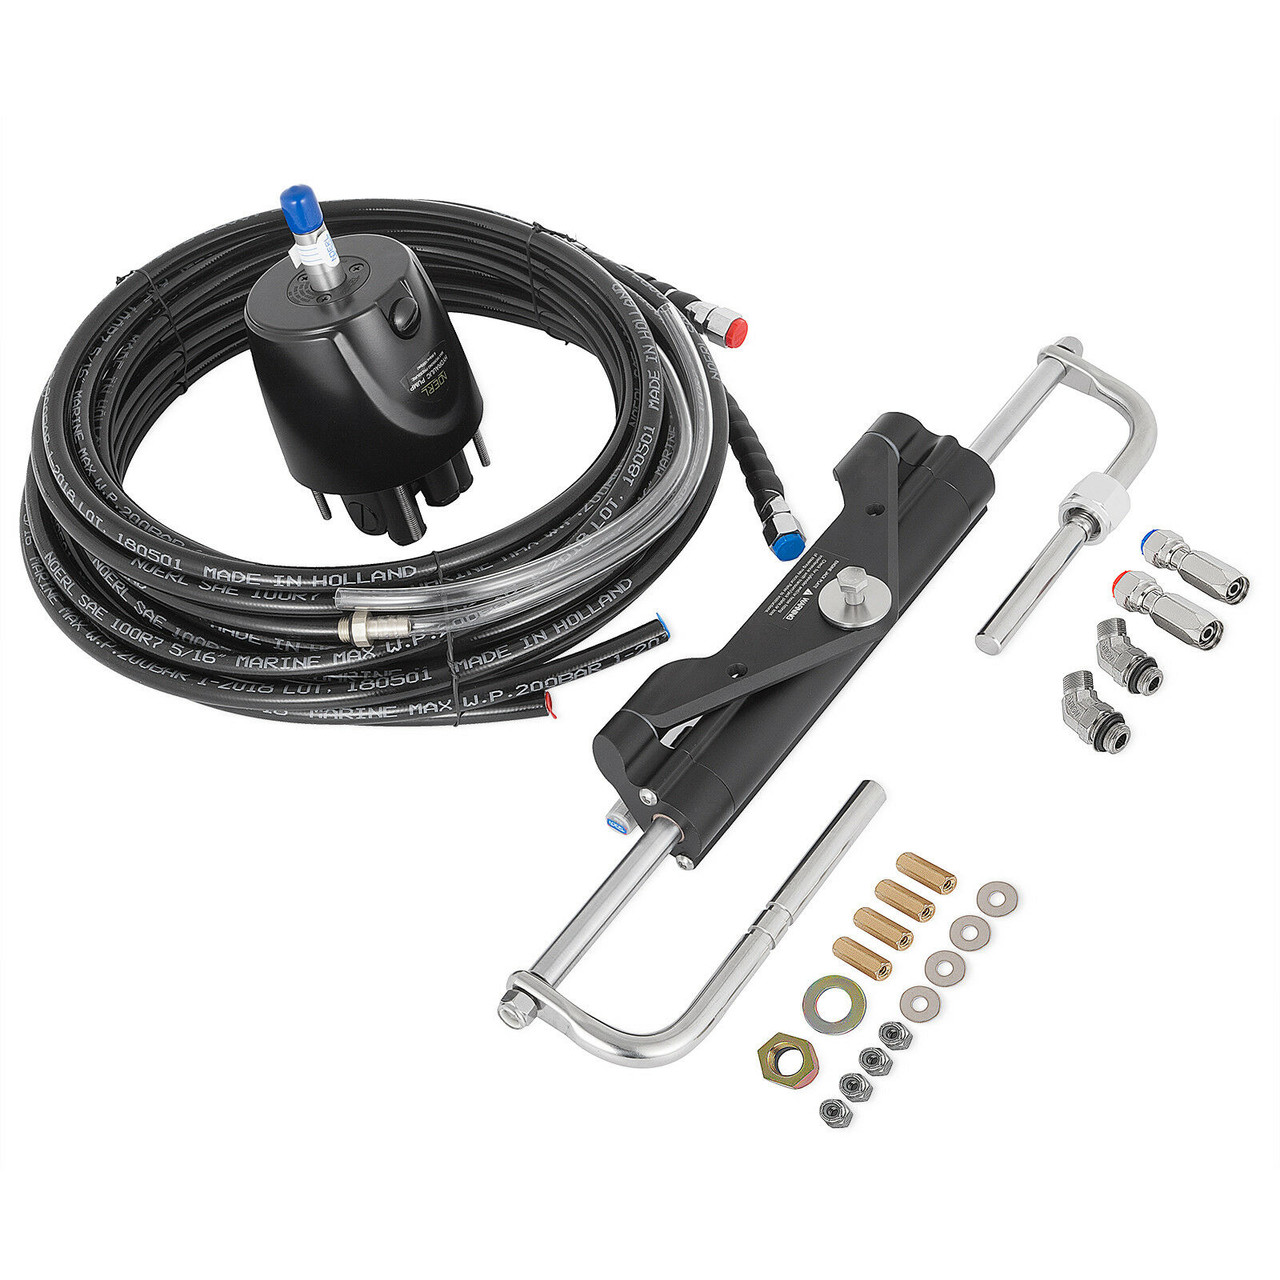 Boat Hydraulic Outboard Steering System Kit - Up To 150 HP and 55 MPH